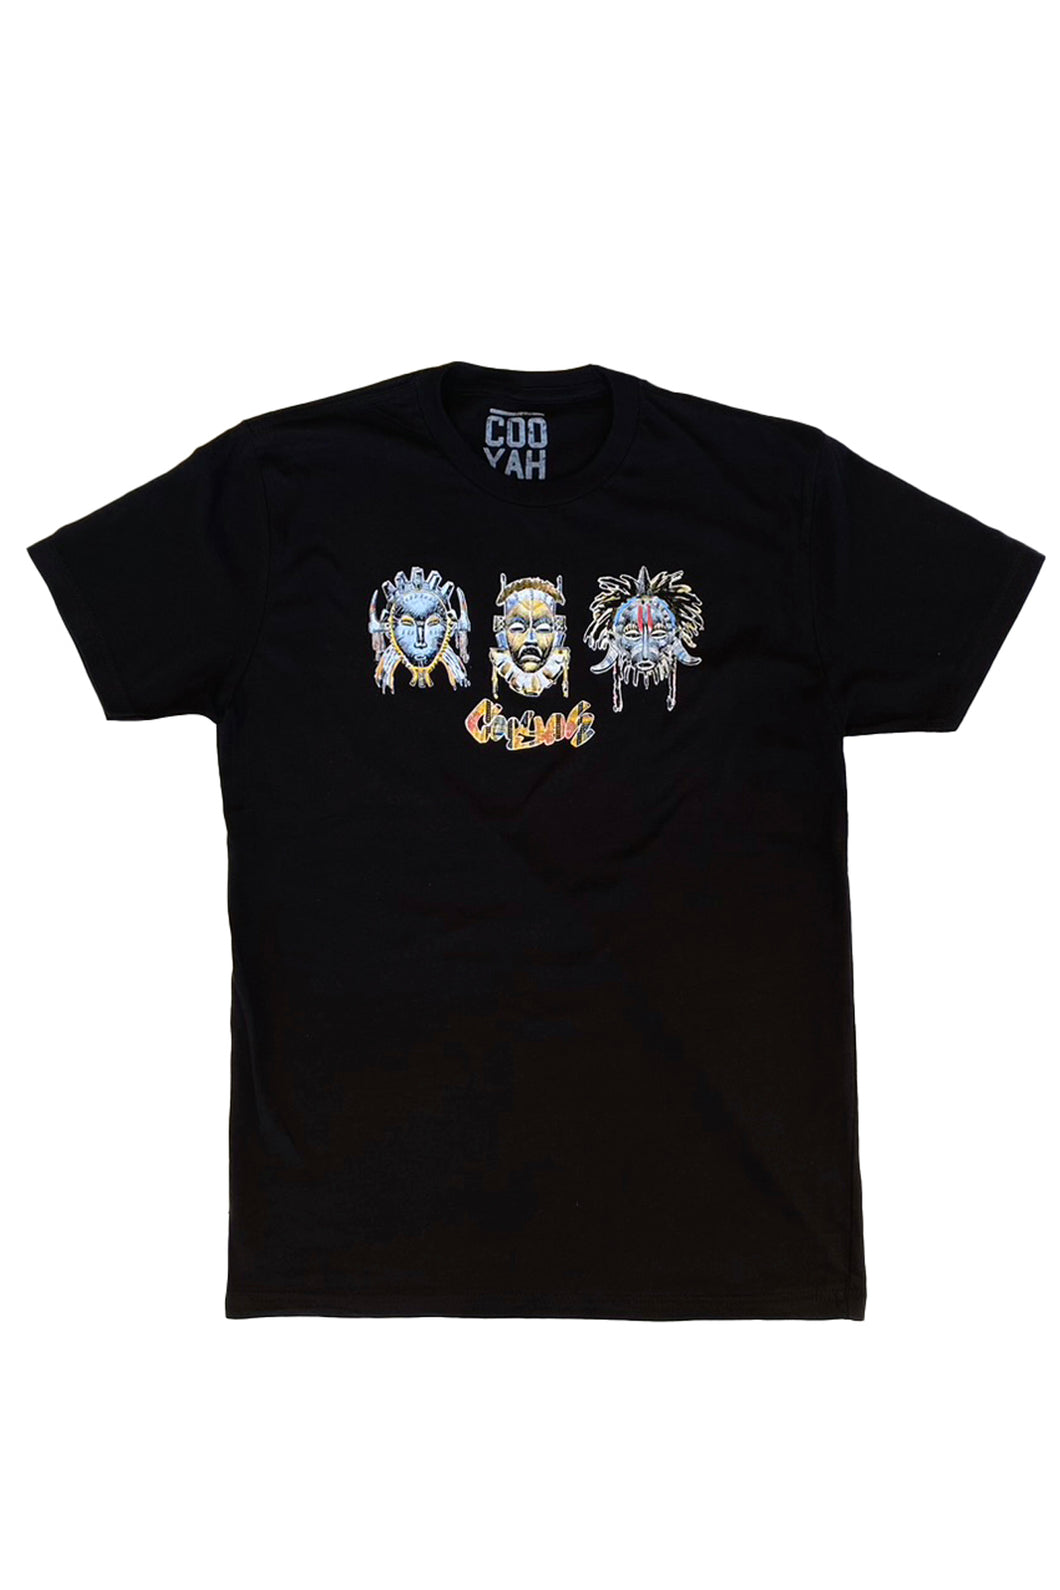 Cooyah Tribal Mask graphic tee with African Mask design